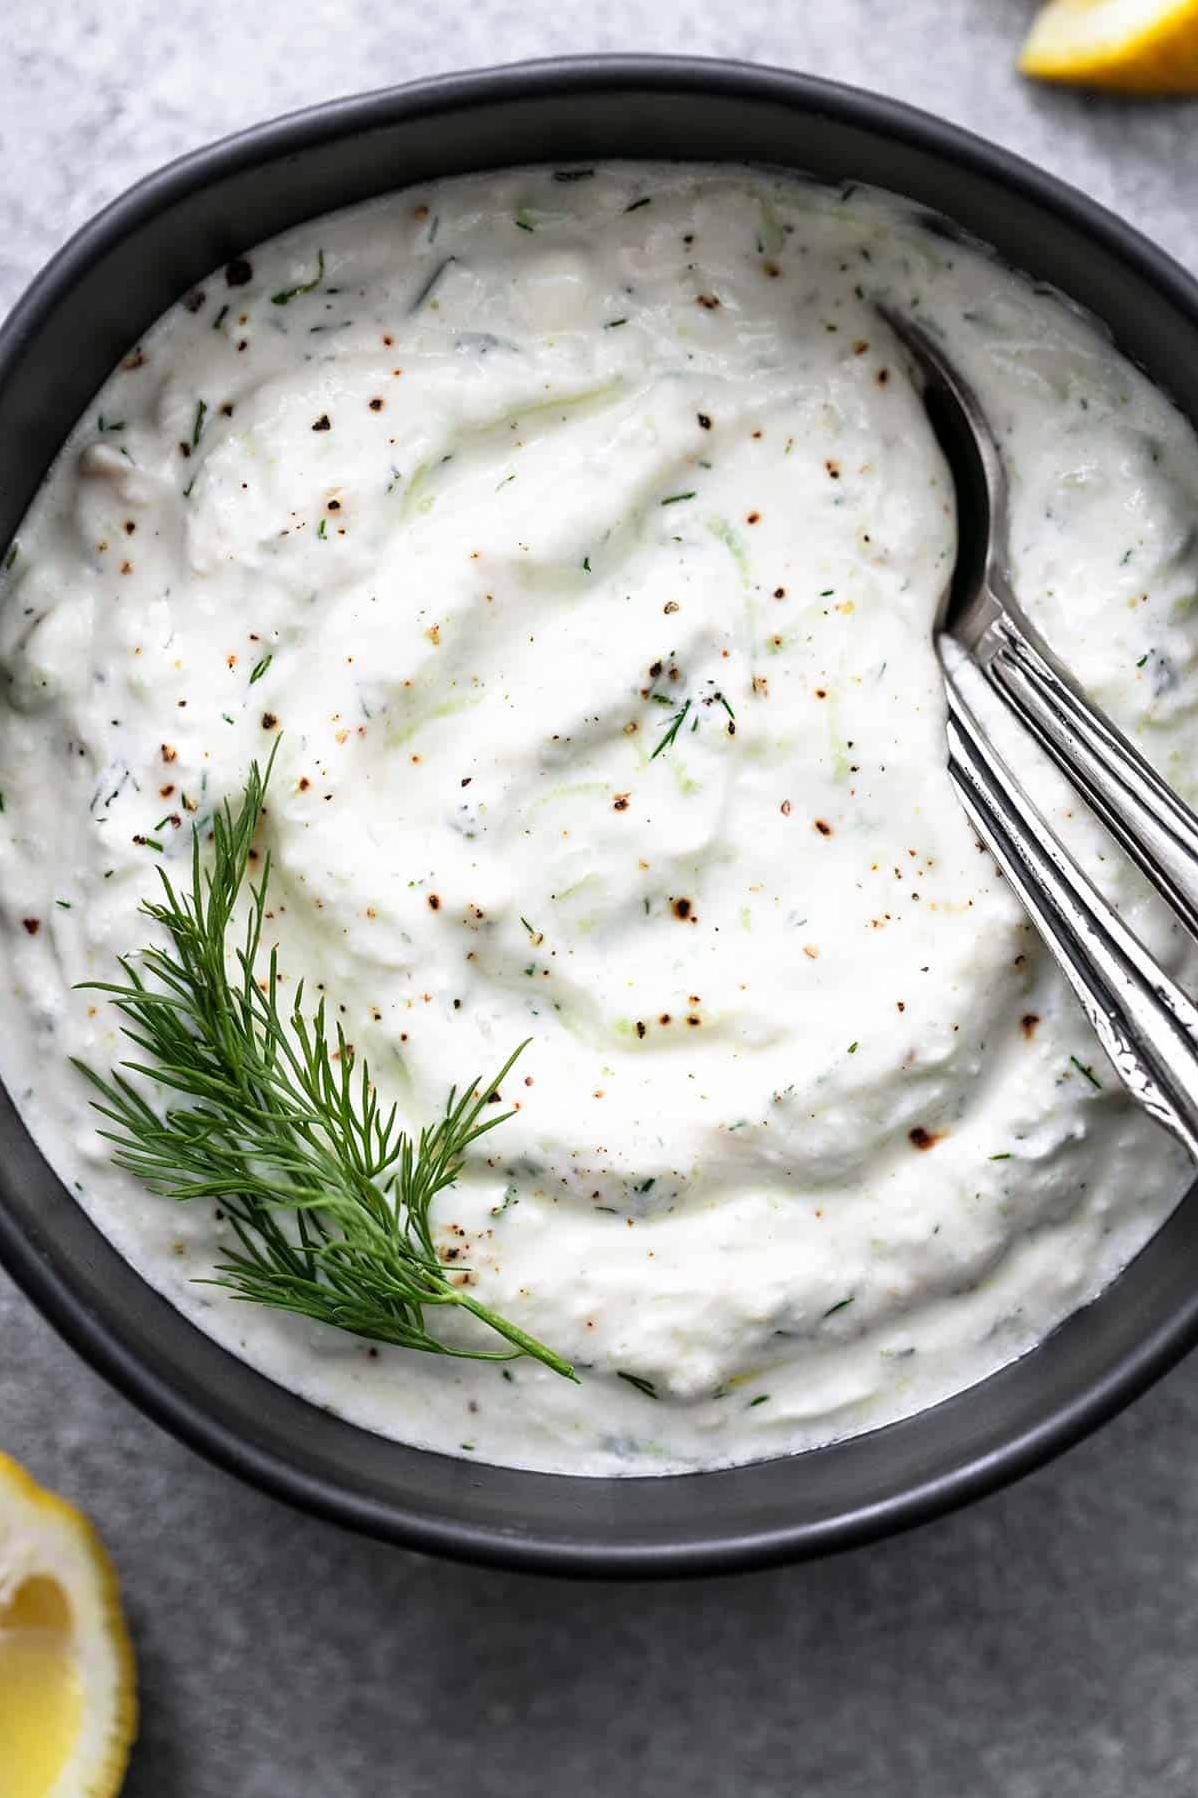  Tzatziki sauce: the ultimate game-changer for roasted veggies.